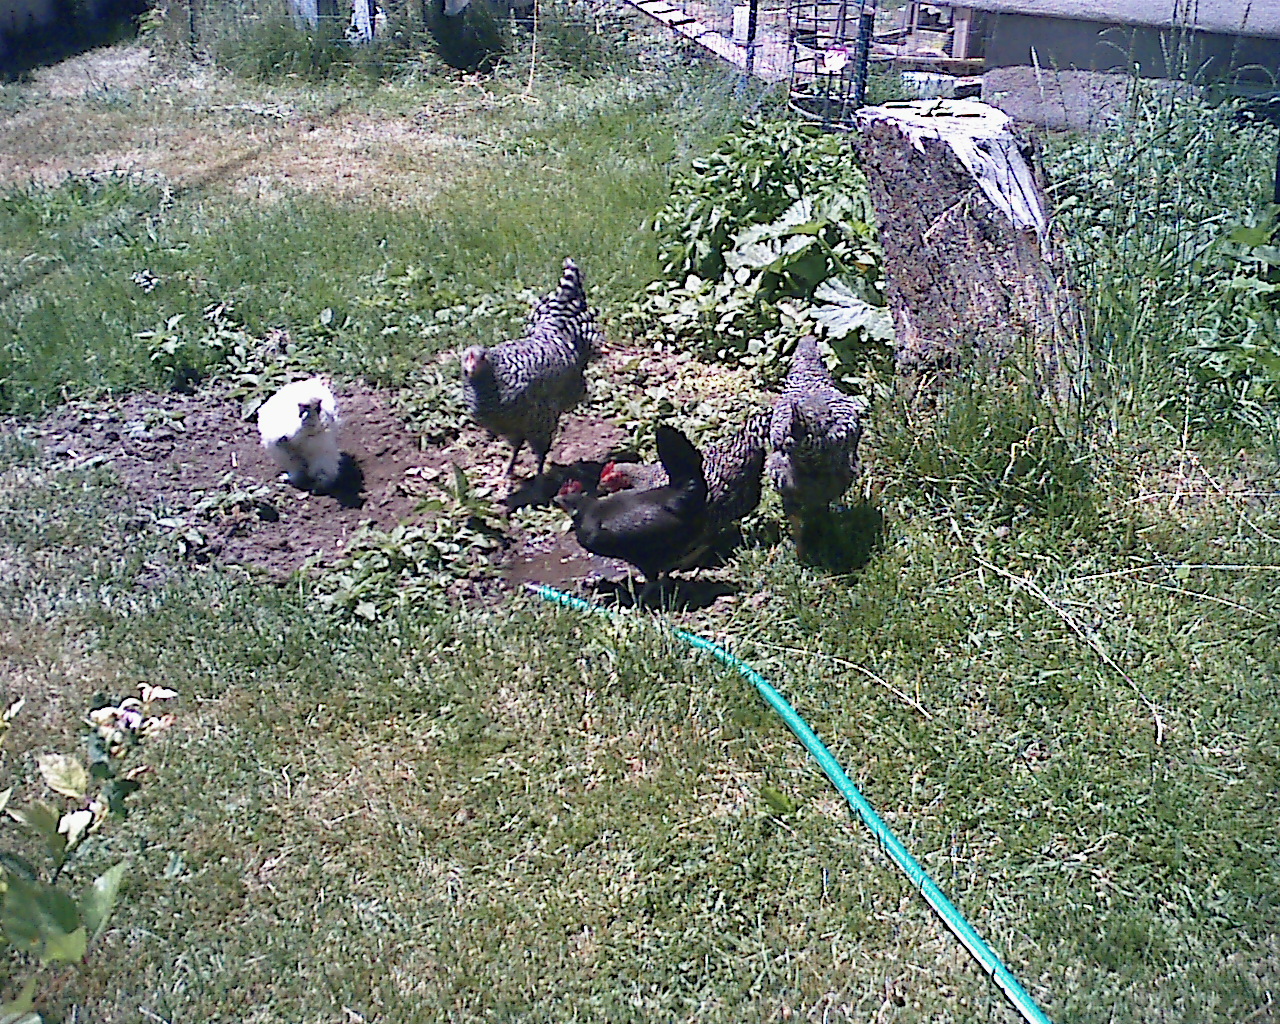 Angel is the white Silkie bantam.  My Barred Rock bantam is named Flora.  The black bantam is Elvira.  My other two Barred Rocks (the twins) are Zoey and Chloe.  The twins are about 3 months old and my bantams are almost 1 year old.